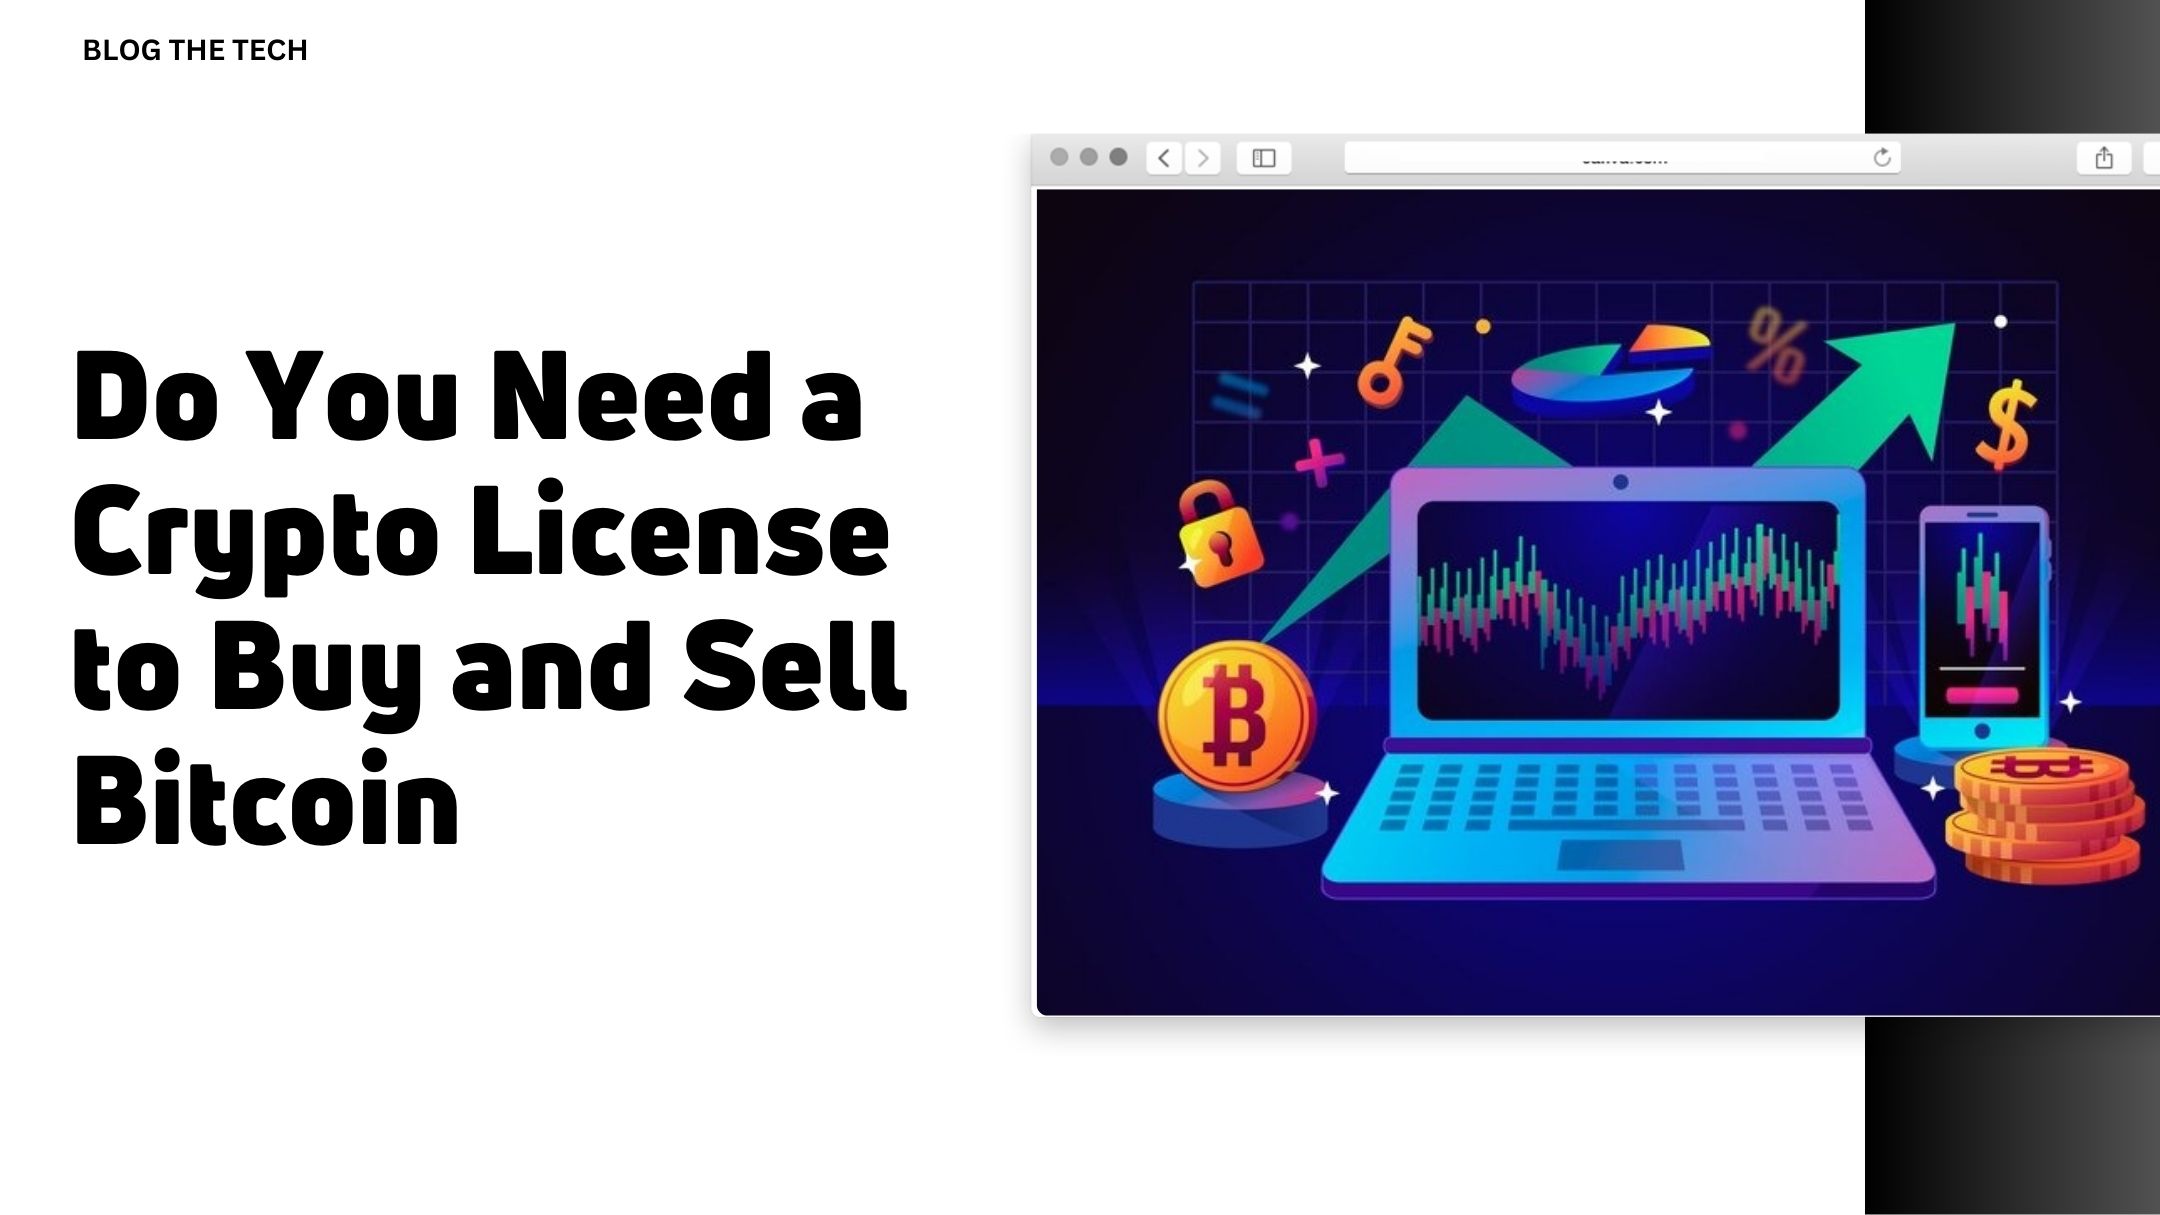 Do You Need a Crypto License to Buy and Sell Bitcoin